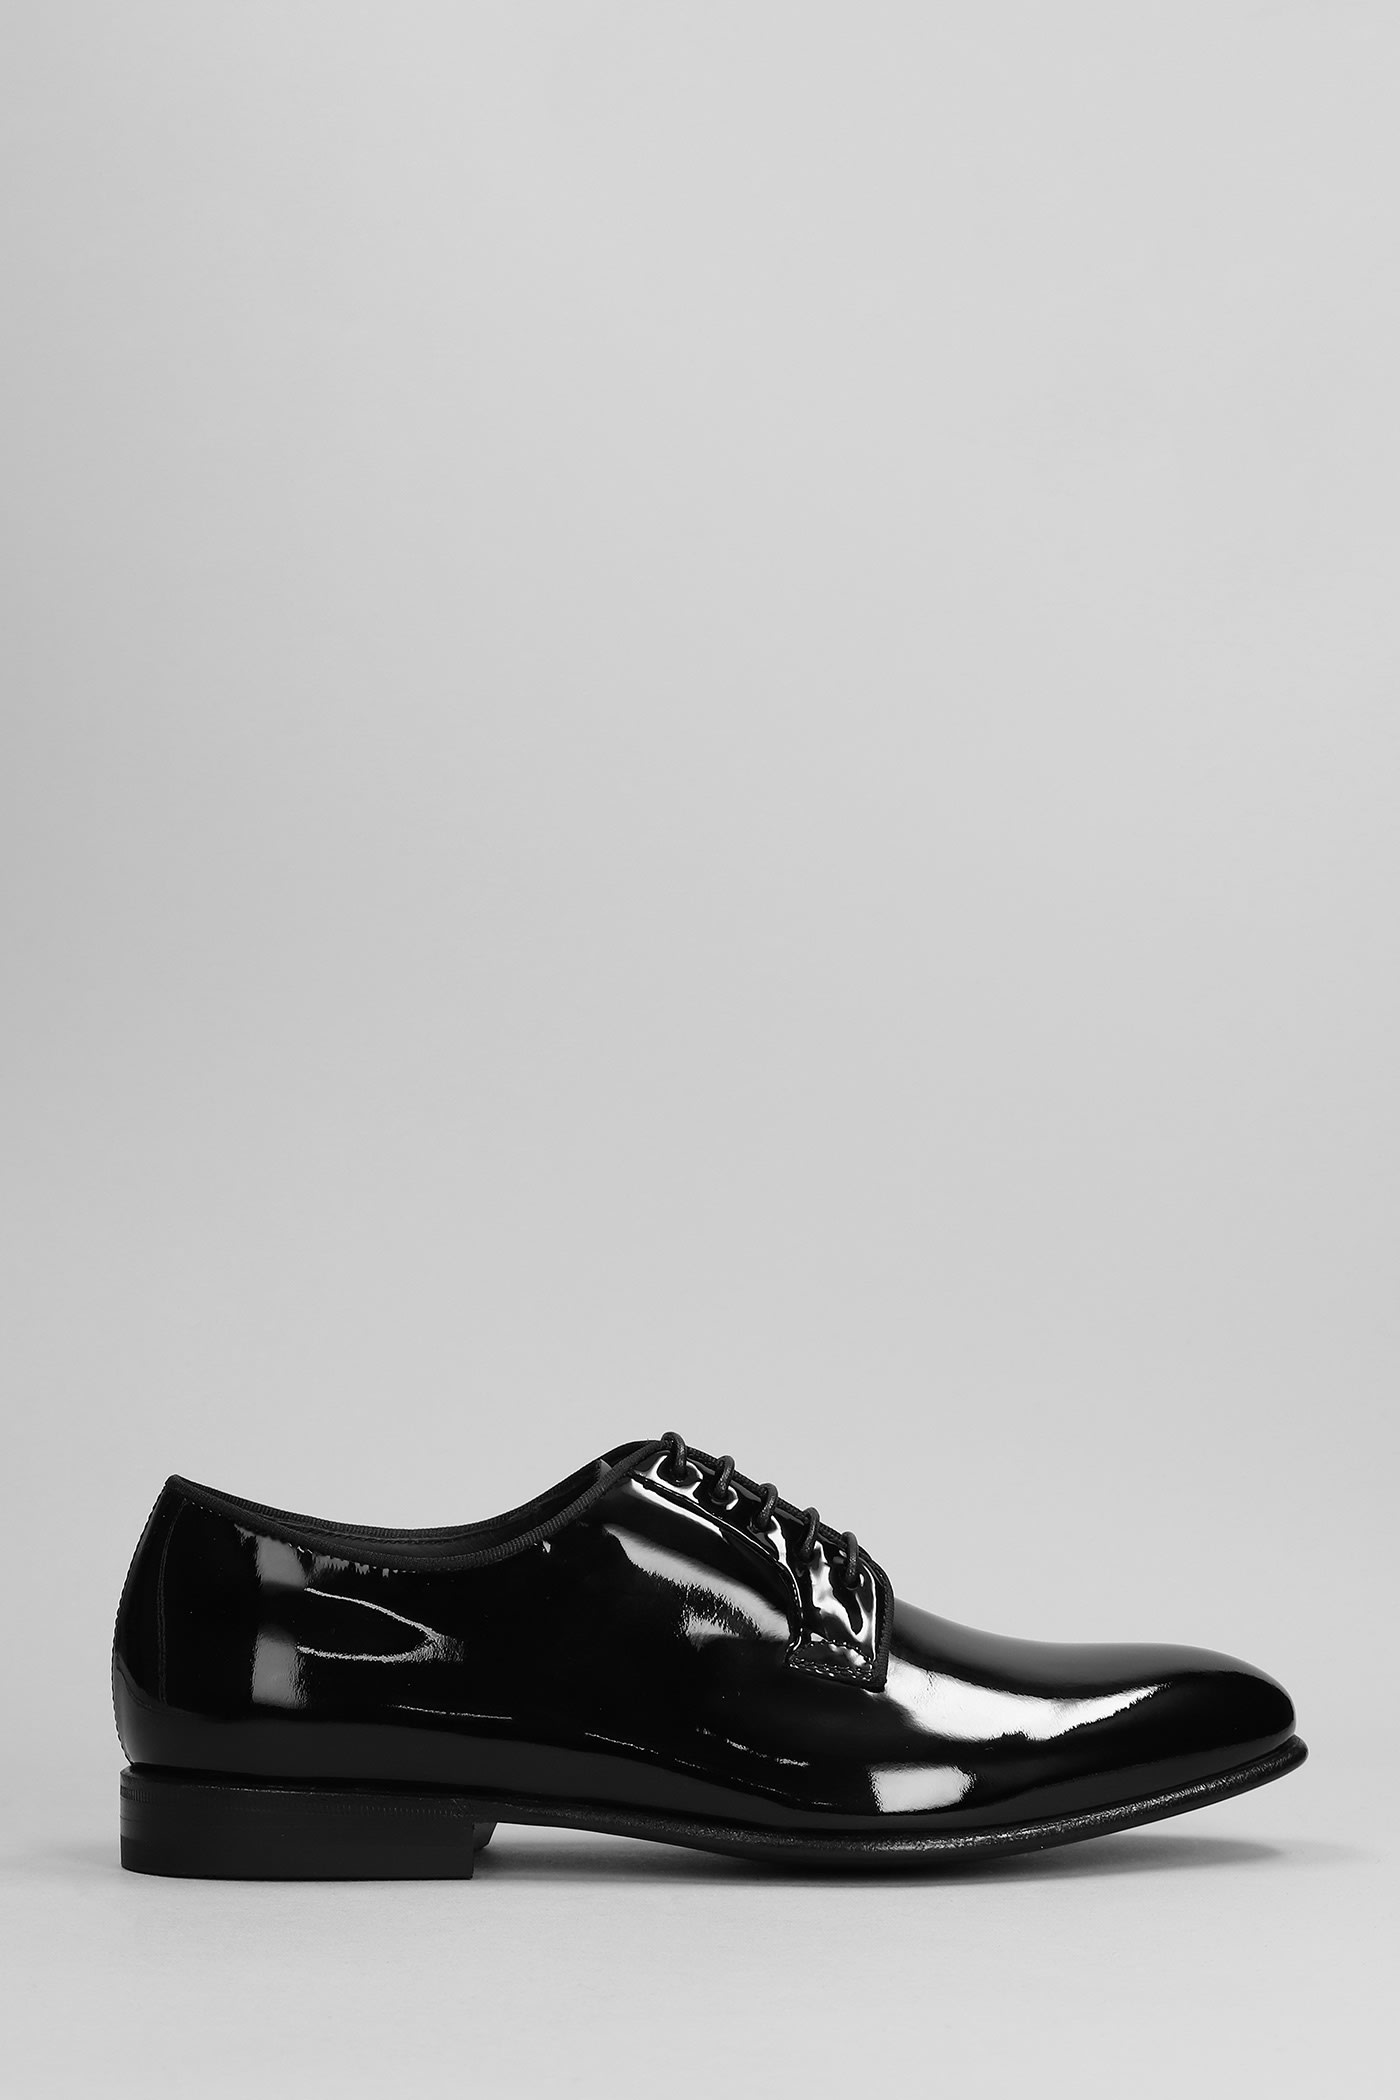 Green George Lace Up Shoes In Black Patent Leather